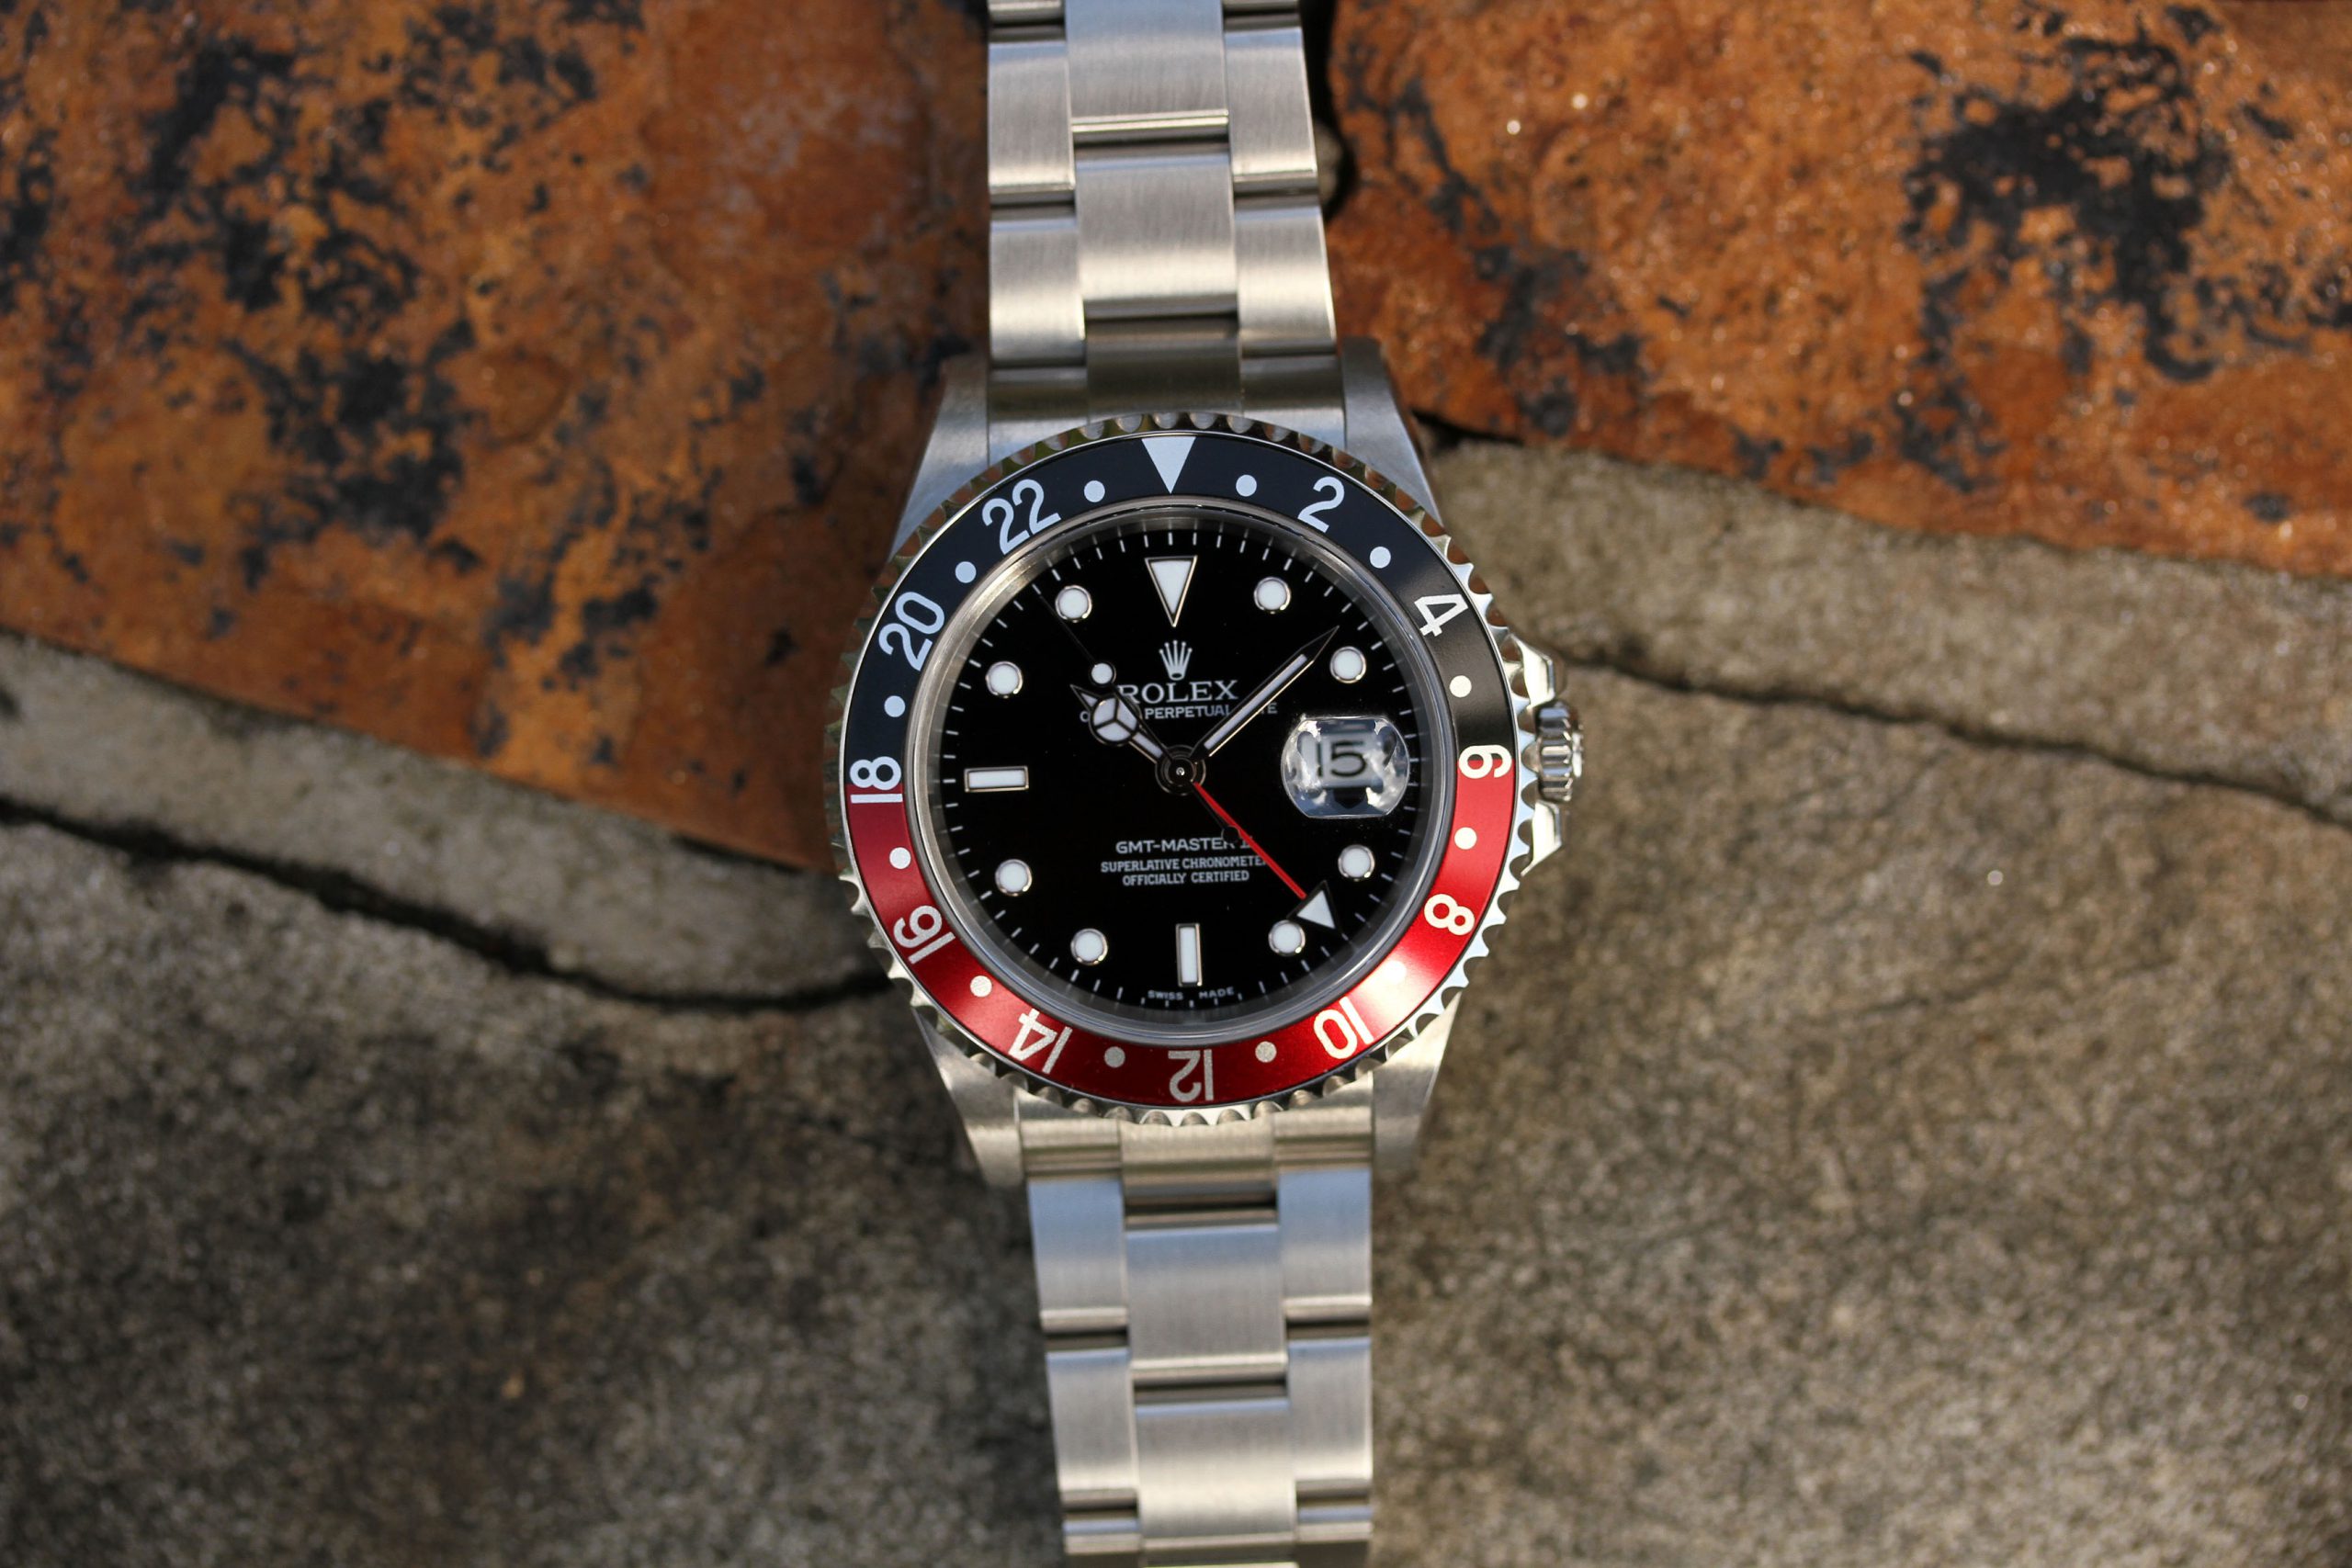 2005 New Old Stock Rolex GMT-Master 2 16710 "No Holes, Unworn, Box & Papers" - Lunar - Buying Selling